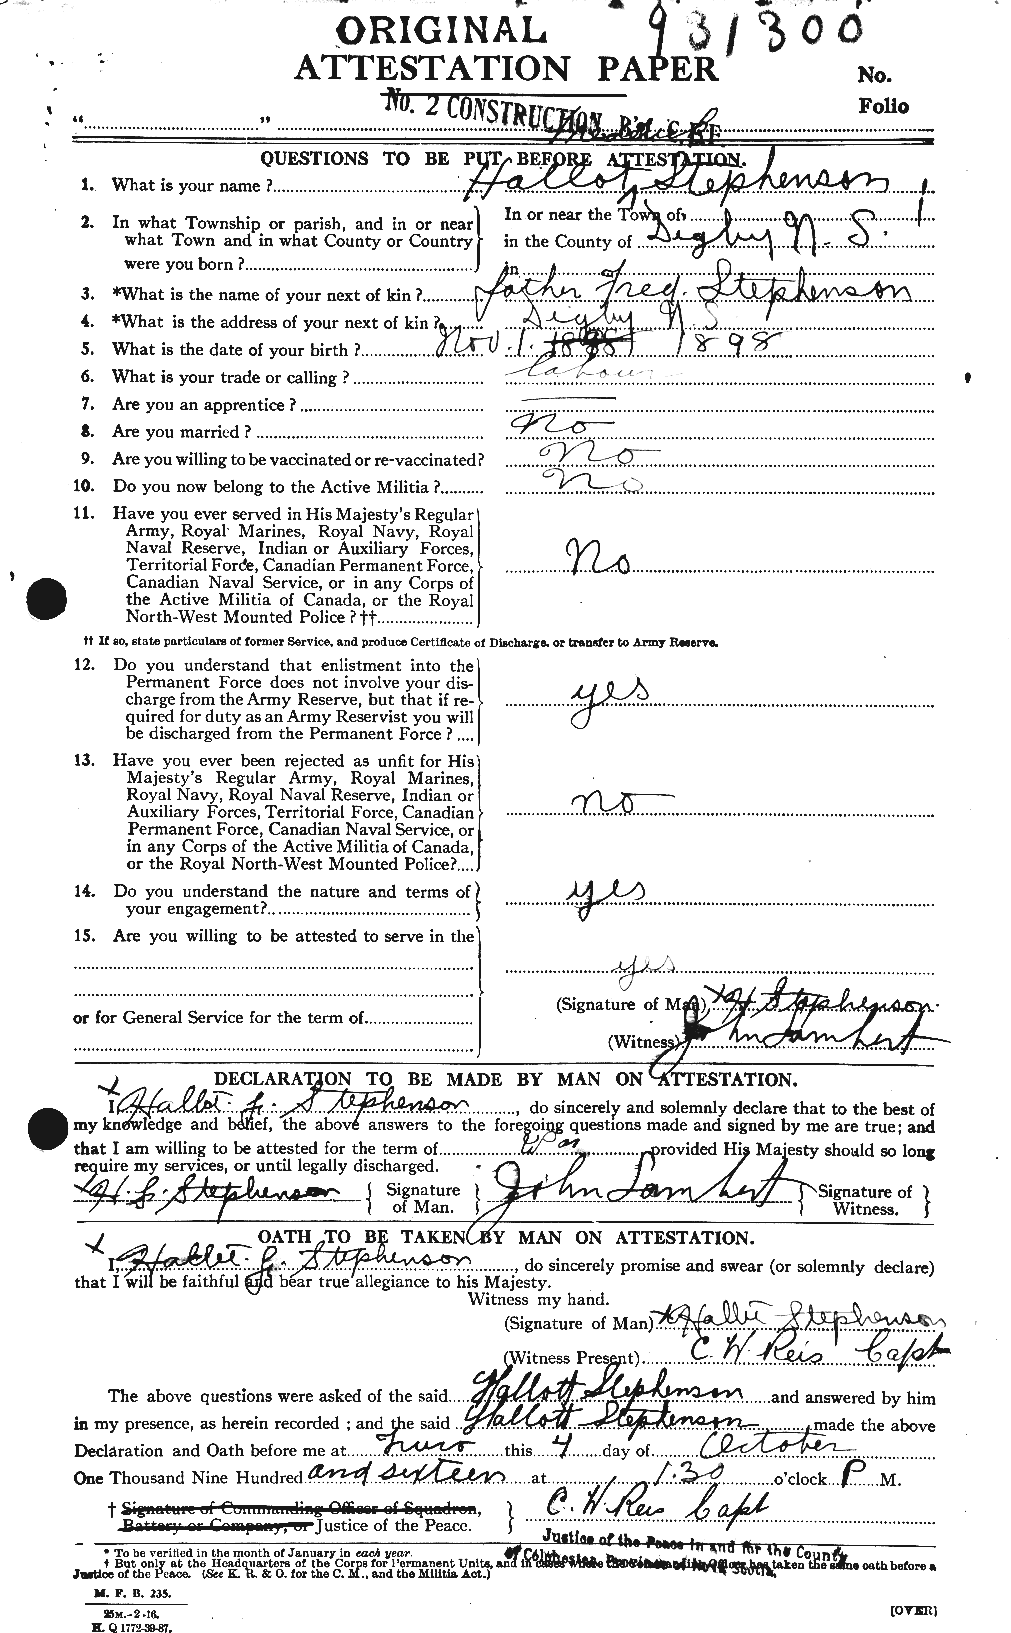 Personnel Records of the First World War - CEF 117216a